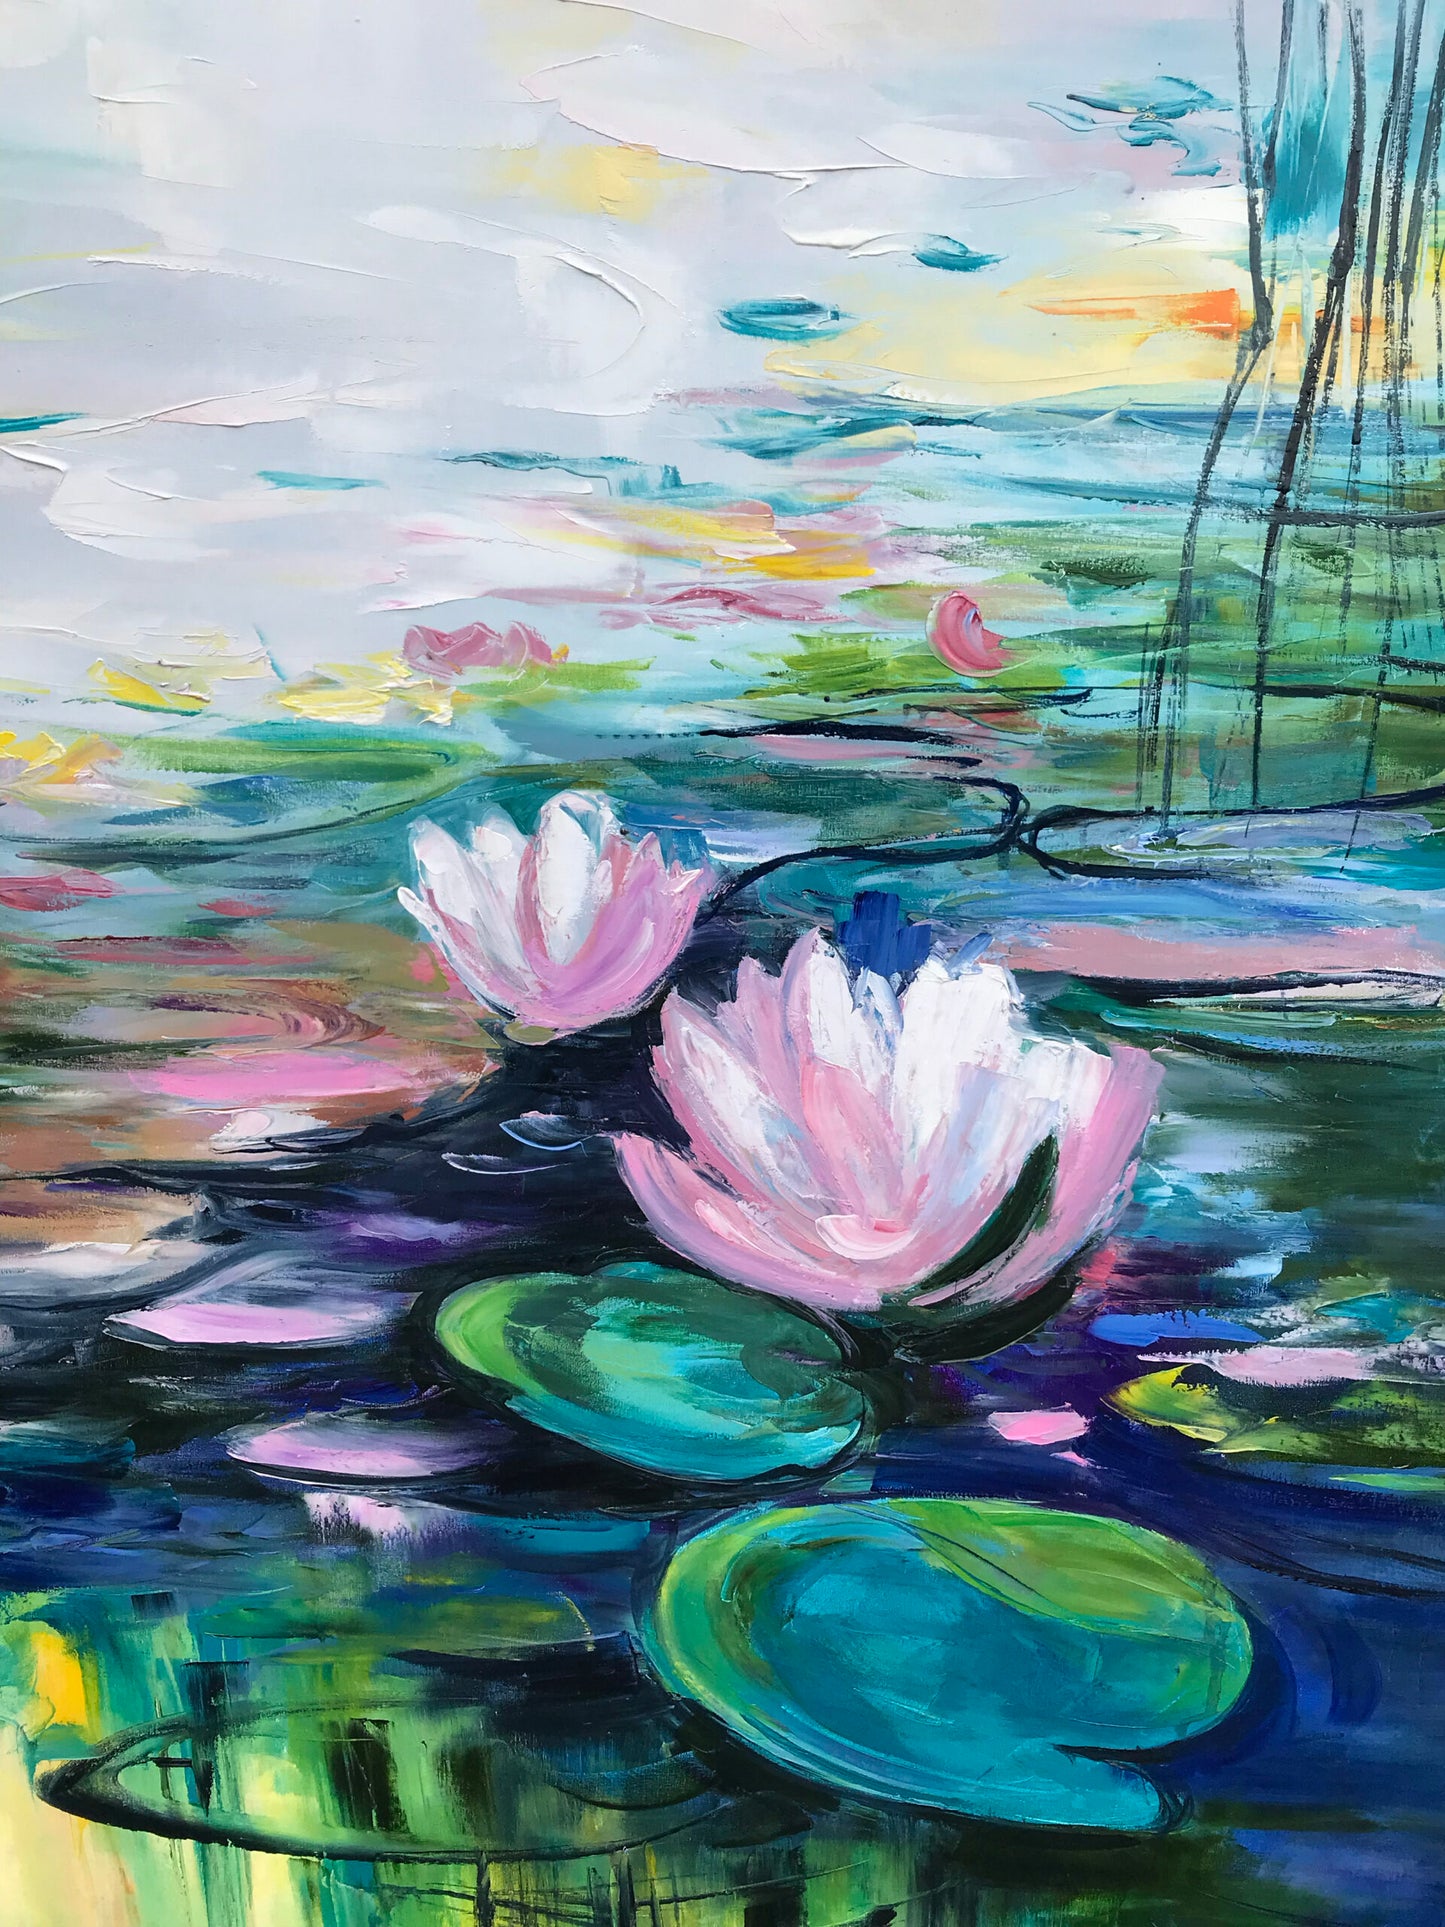 Monet Painting "Water Lilies" Lotus Flower Wall Art Lily Painting 36x36 Dark Green Oil Painting Guest Bedroom Decor Pond Nature Oil Painting